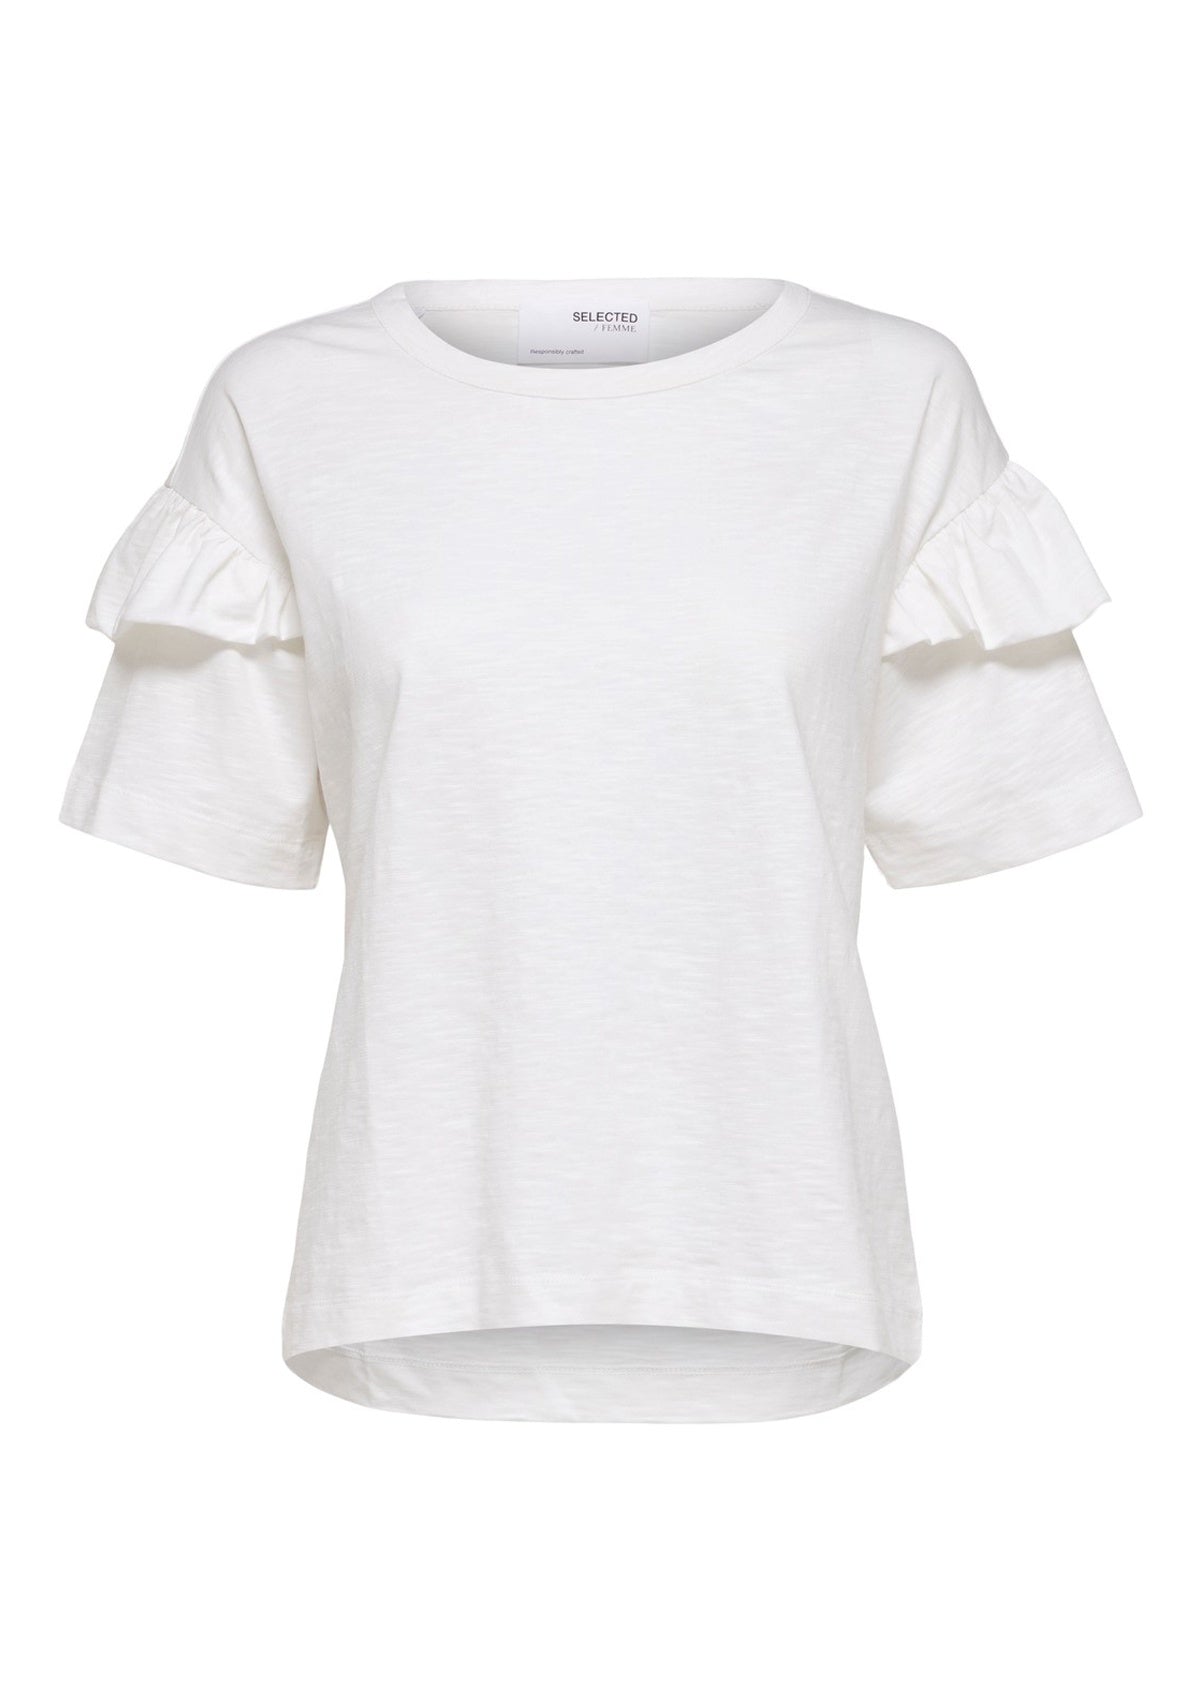 Selected Femme Rylie Florence Tee White